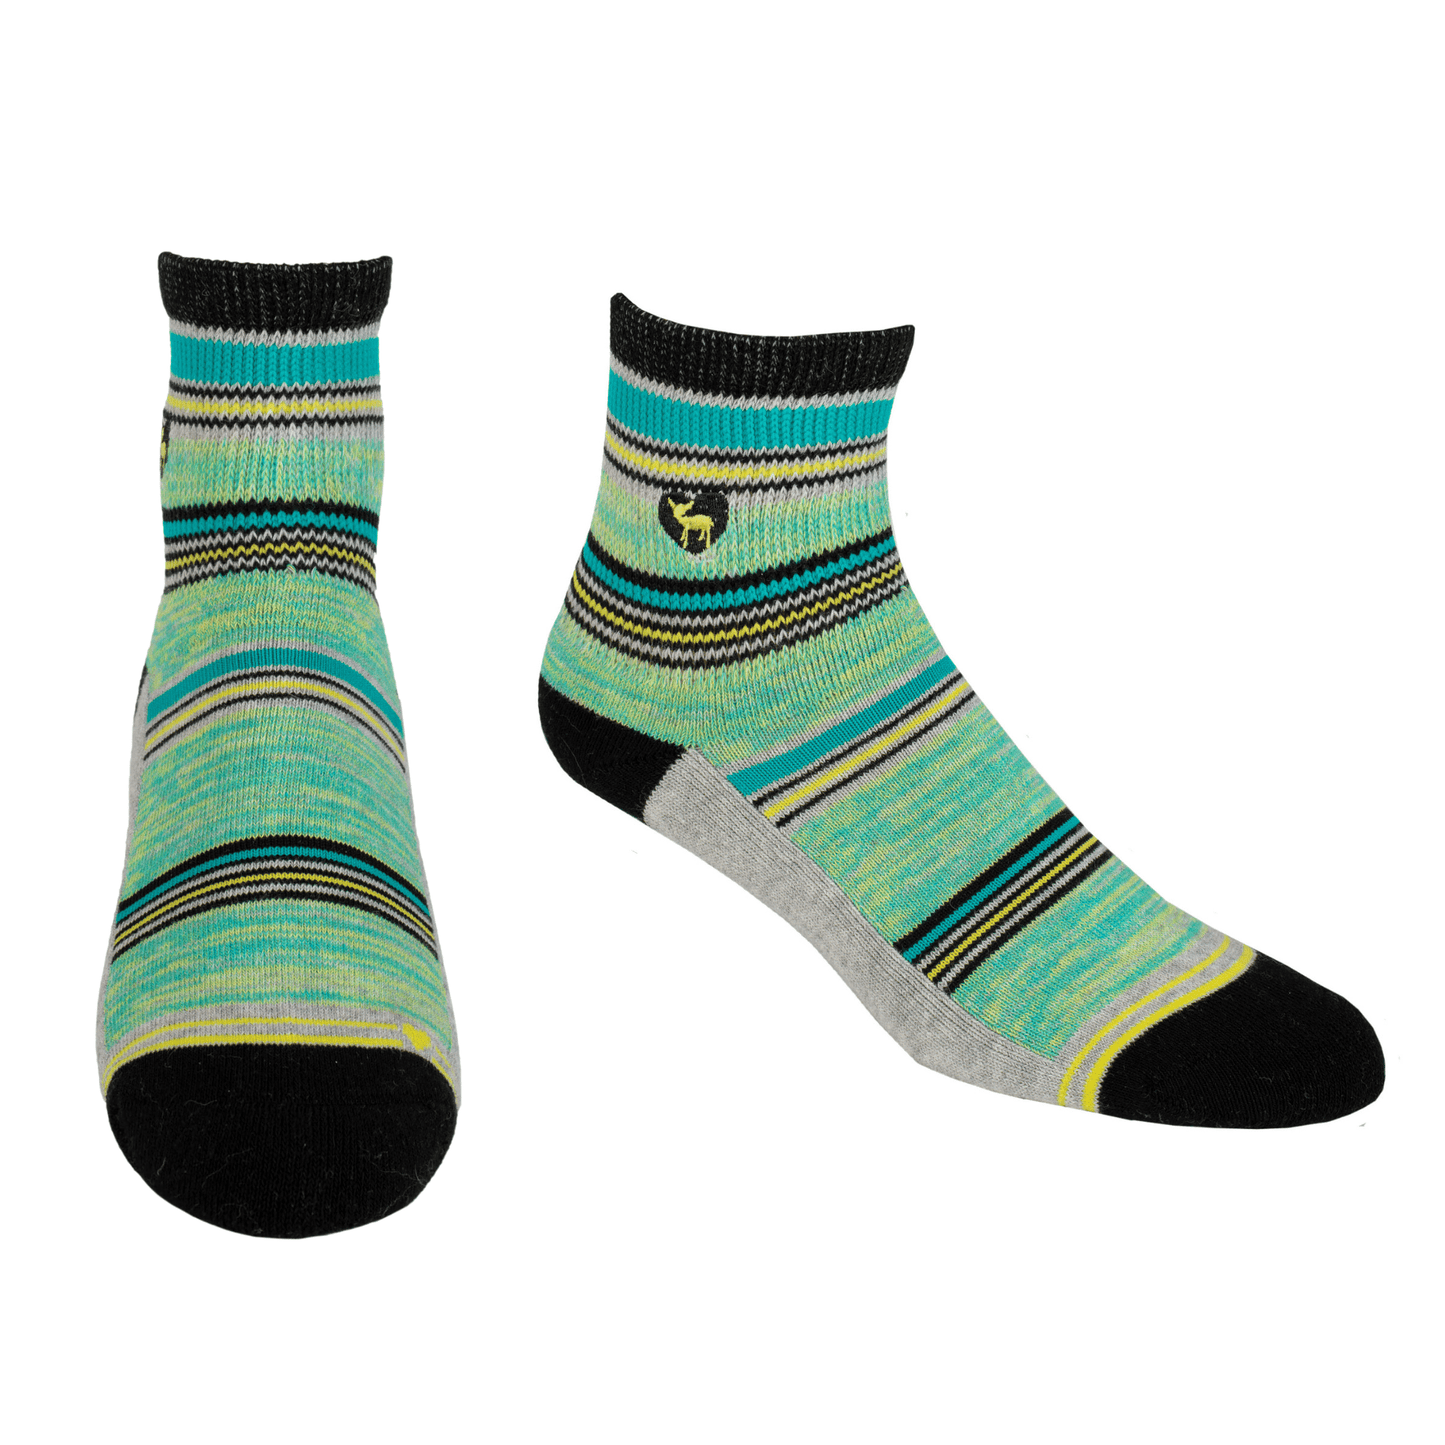  5 Pairs Comfortable and Warm Vintage Crew Socks for